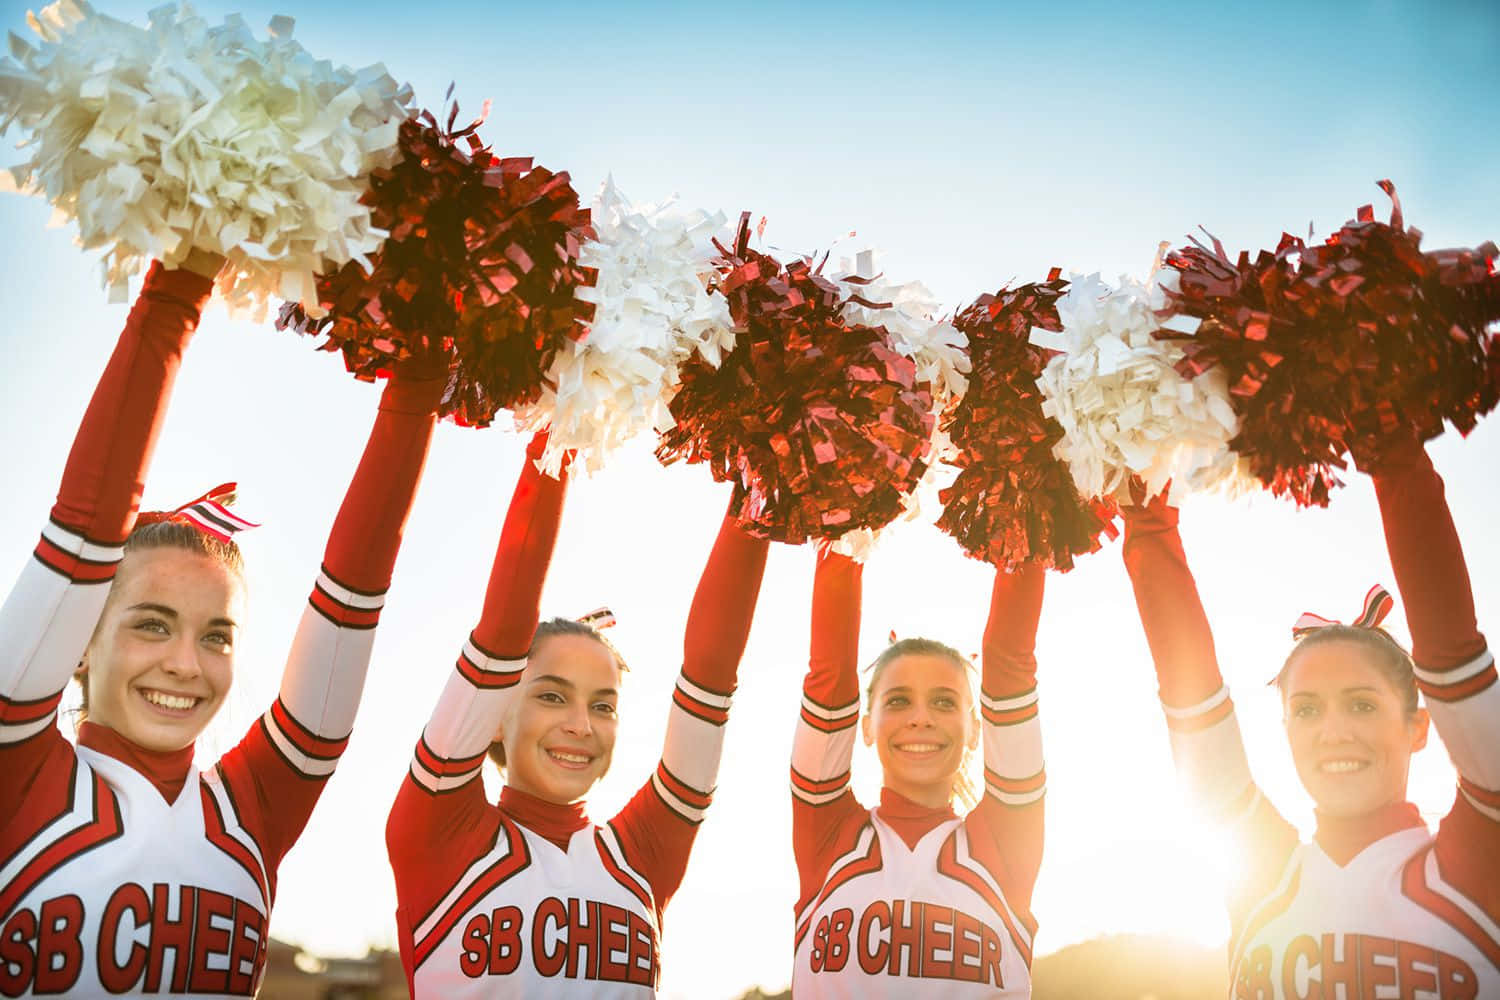 Behind the pom-poms: The life of a pro football cheerleader